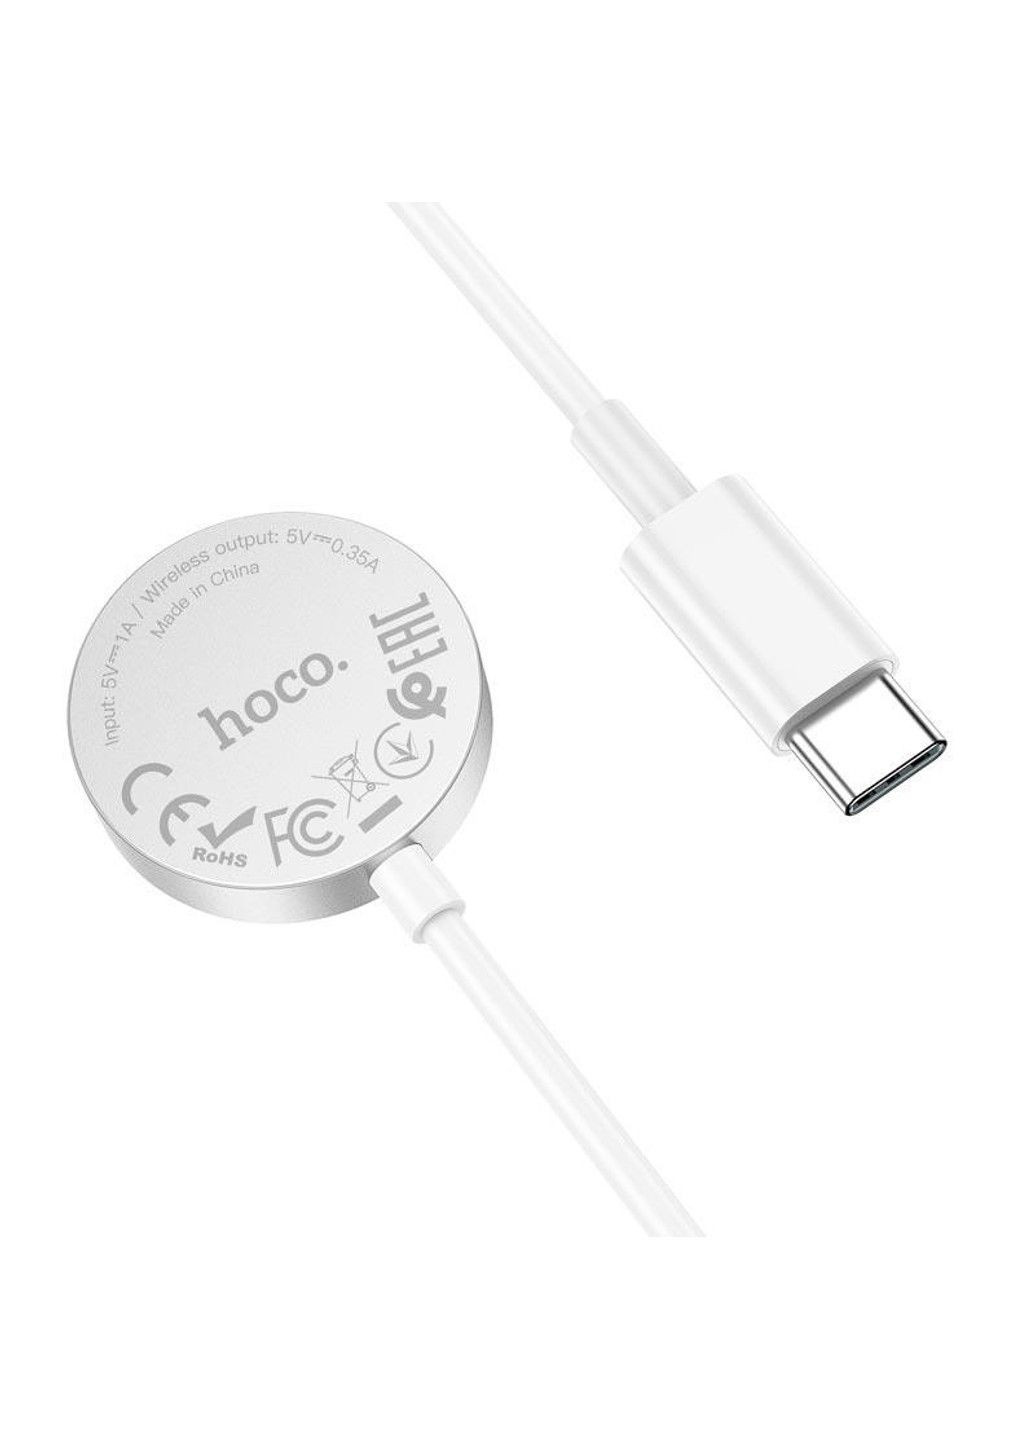 БЗУ CW39C Wireless charger for iWatch (Type-C) Hoco (282627493)